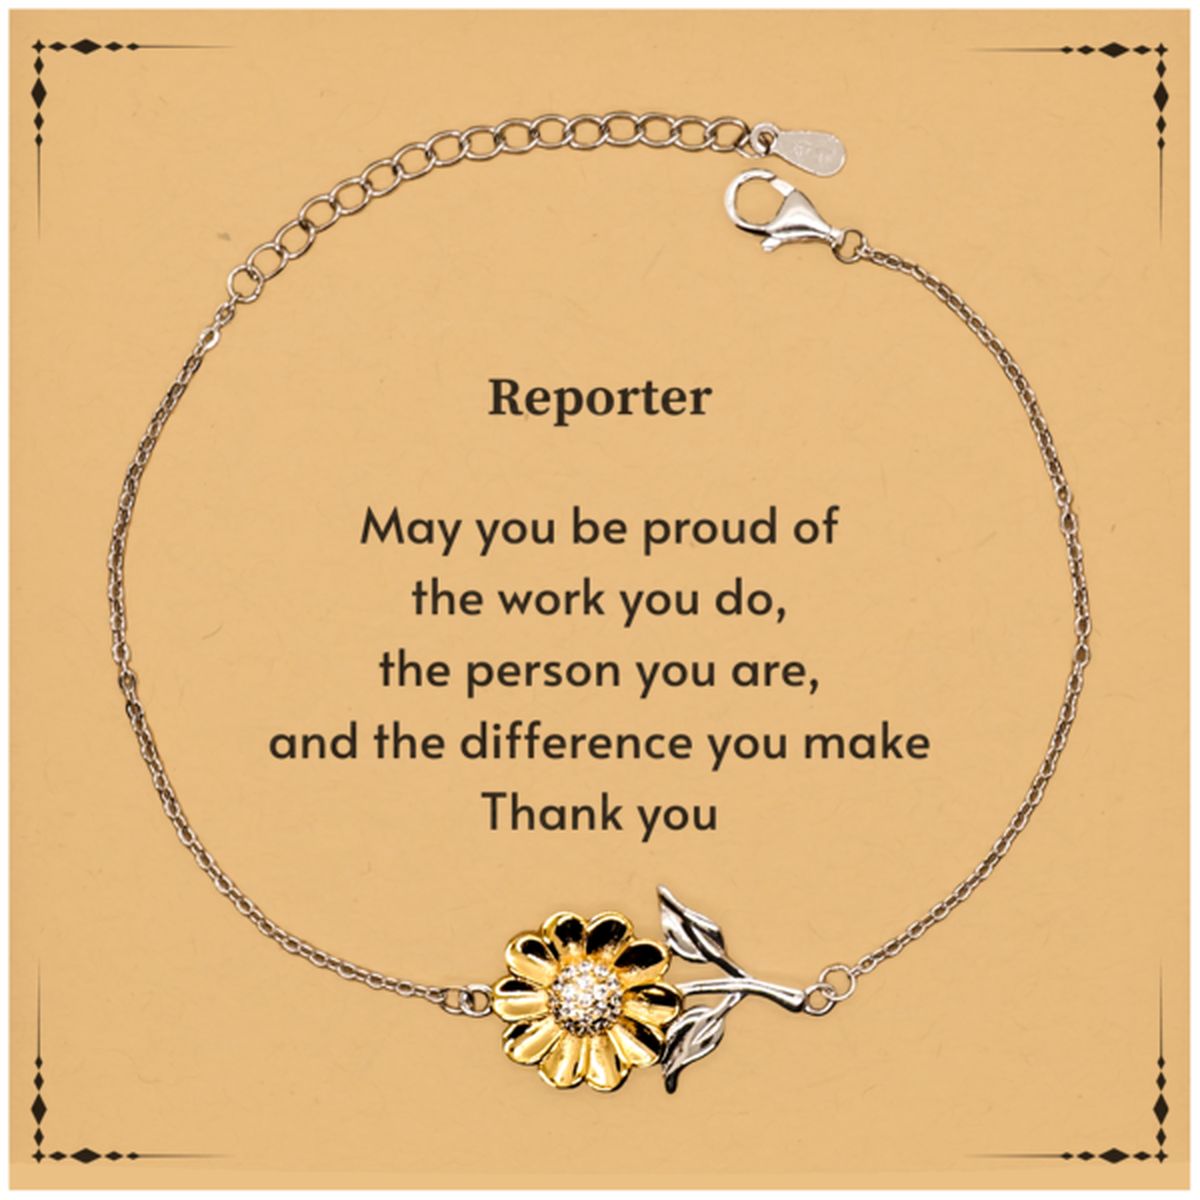 Heartwarming Sunflower Bracelet Retirement Coworkers Gifts for Reporter, Reporter May You be proud of the work you do, the person you are Gifts for Boss Men Women Friends